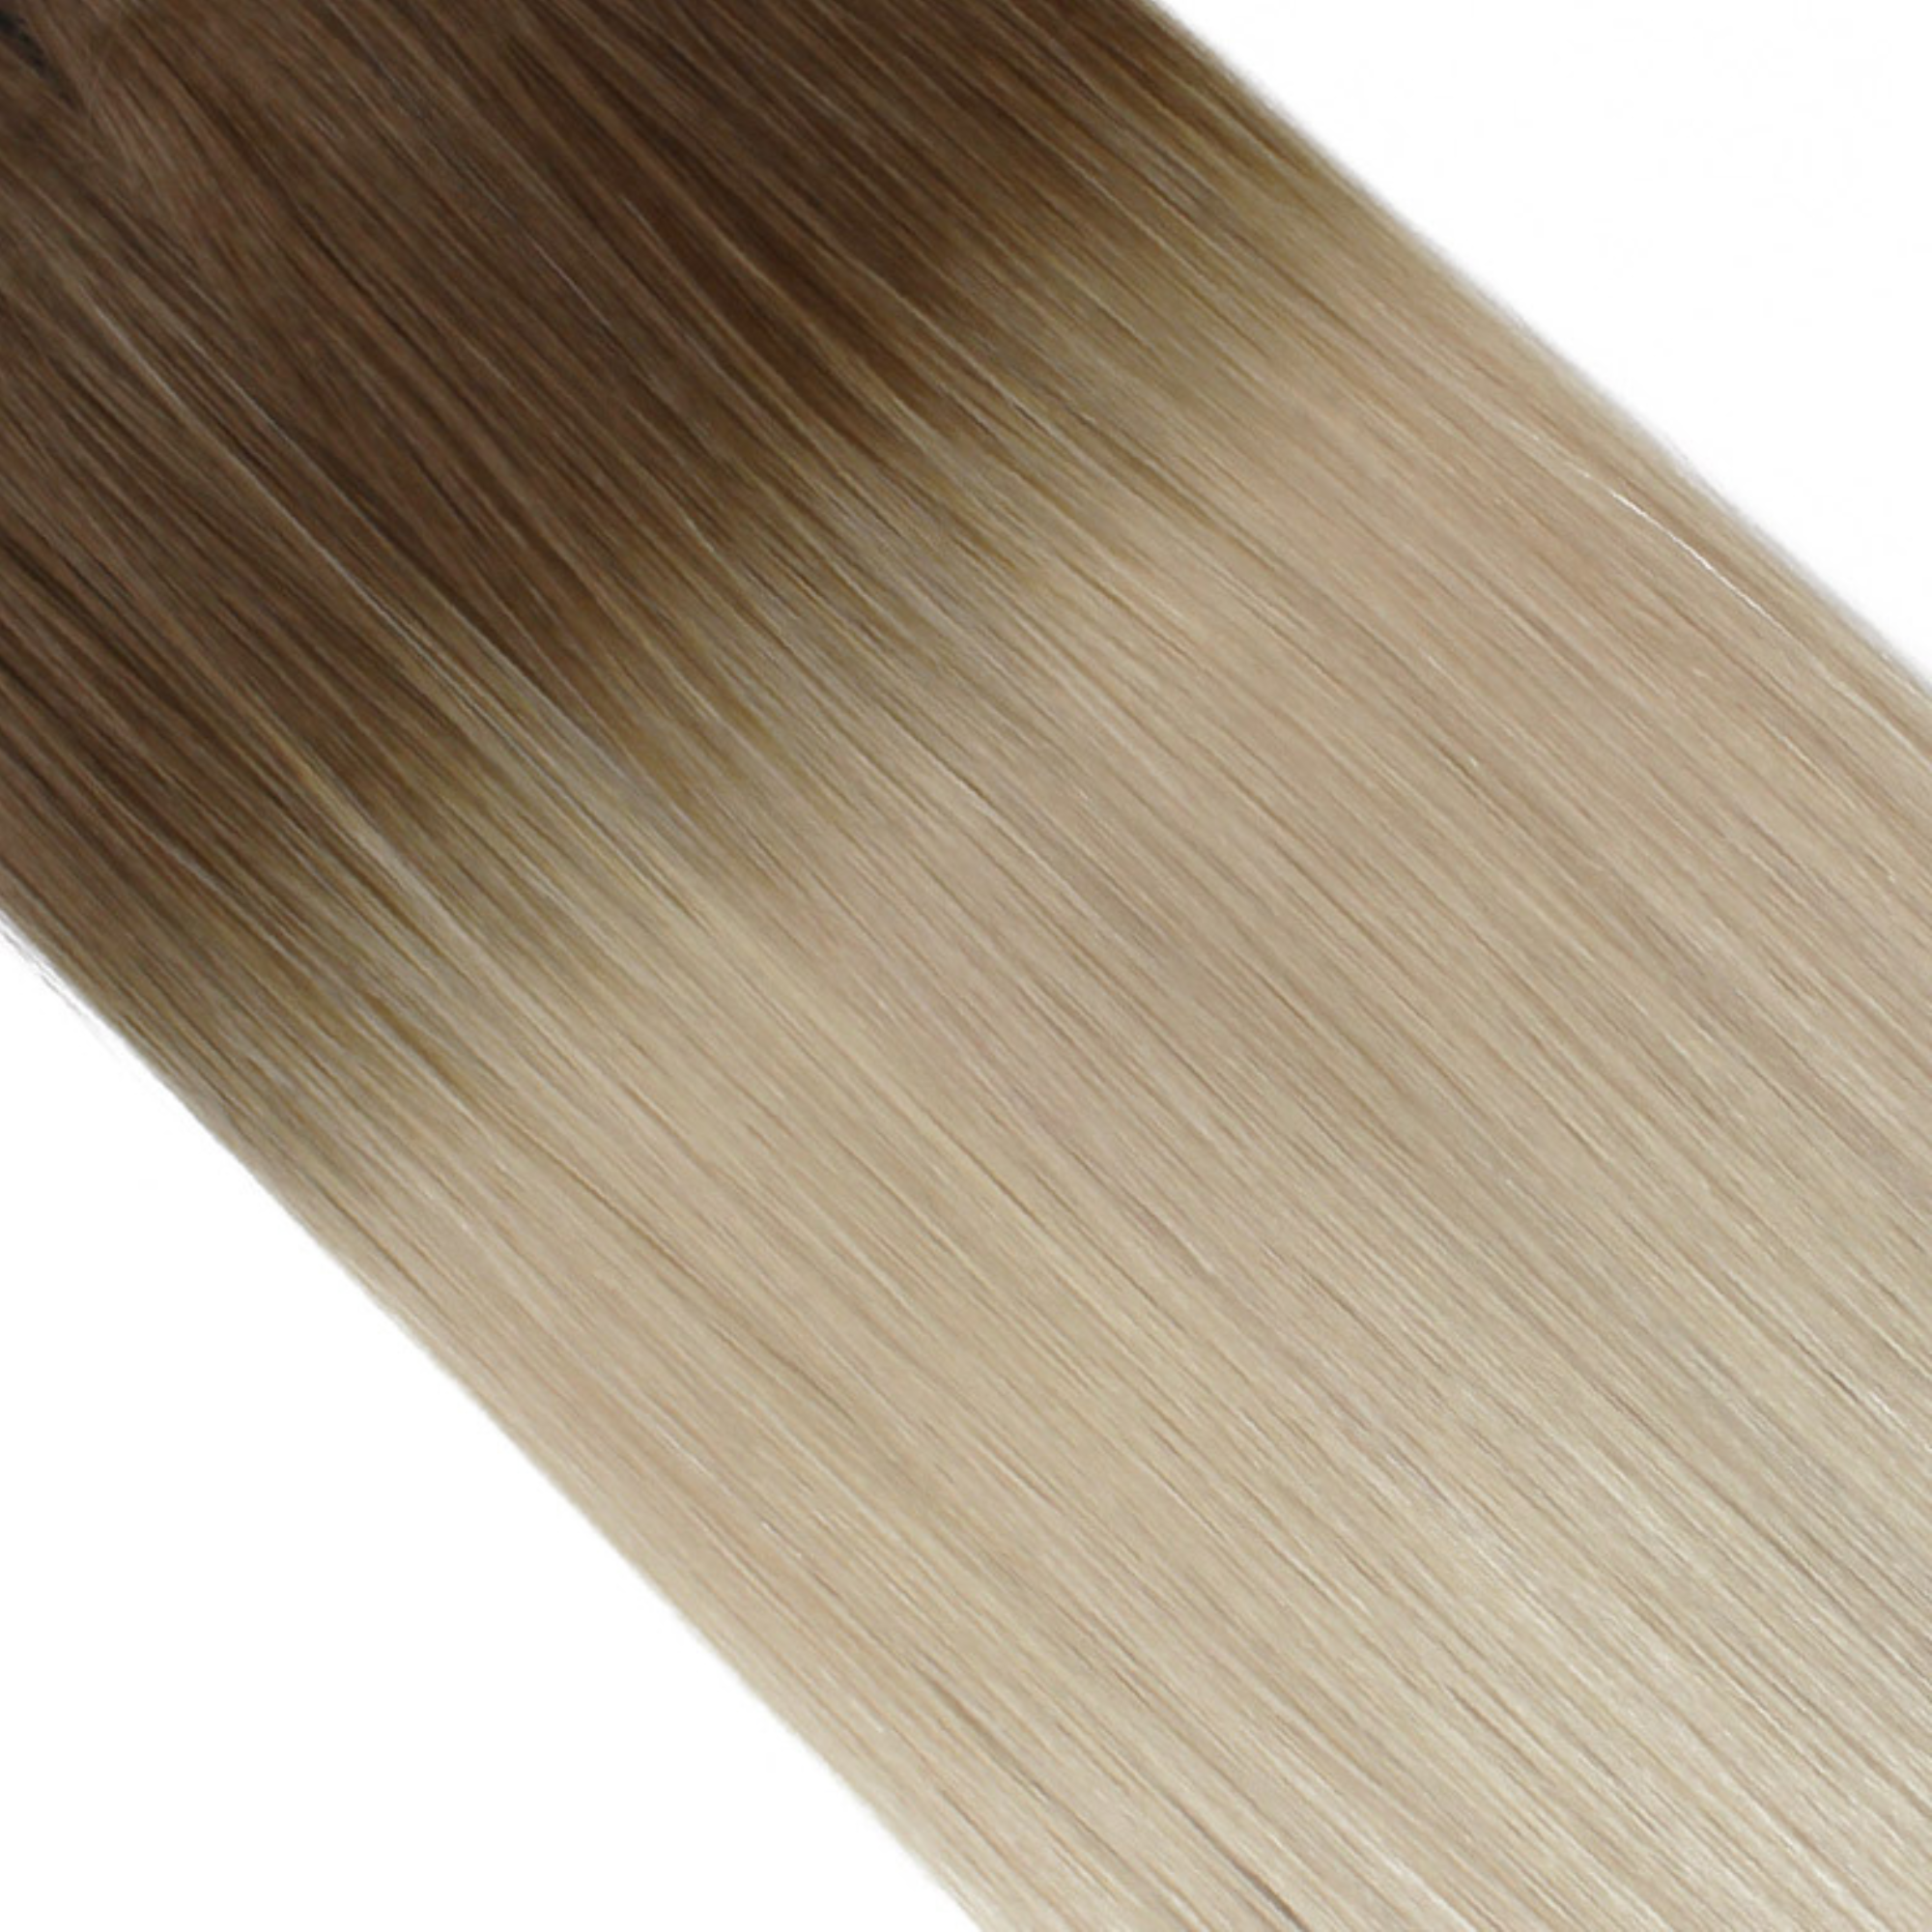 "hair rehab london 22" tape hair extensions shade swatch titled rooted blonde af"